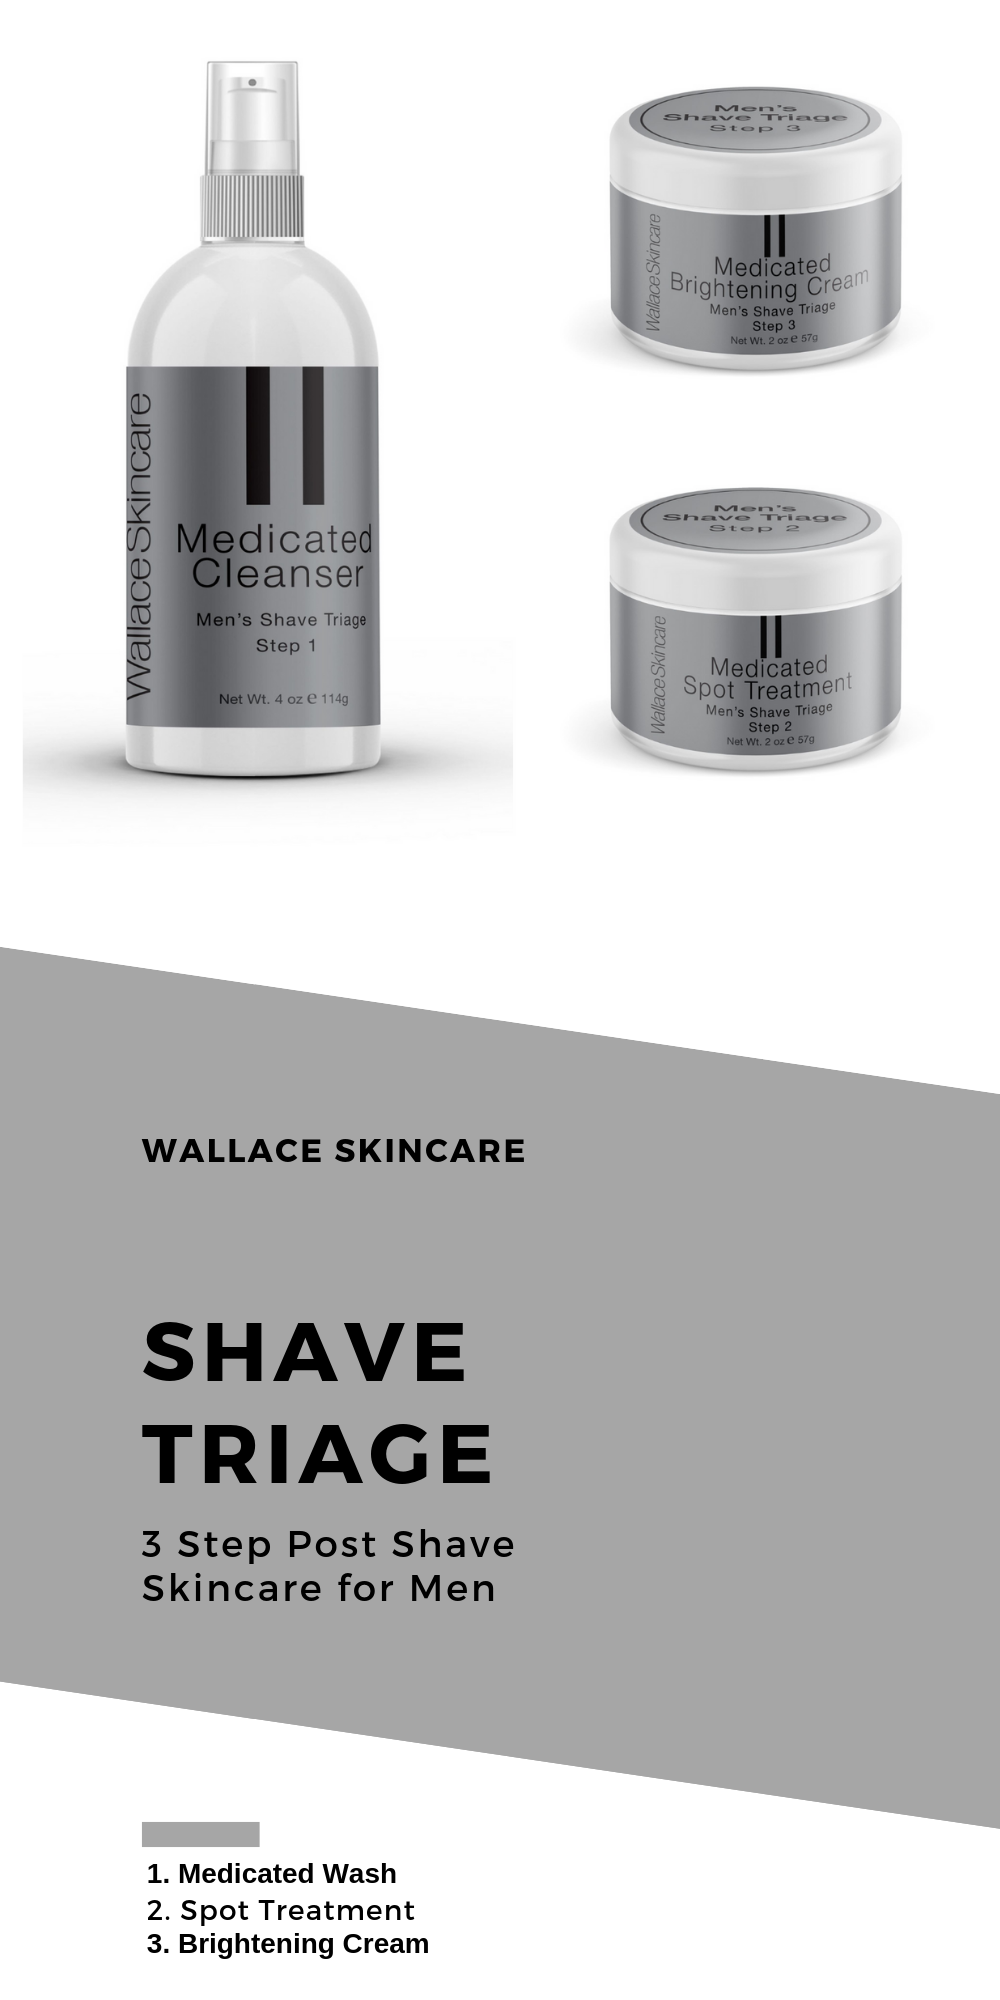 Shave Triage Kit by Wallace Skincare